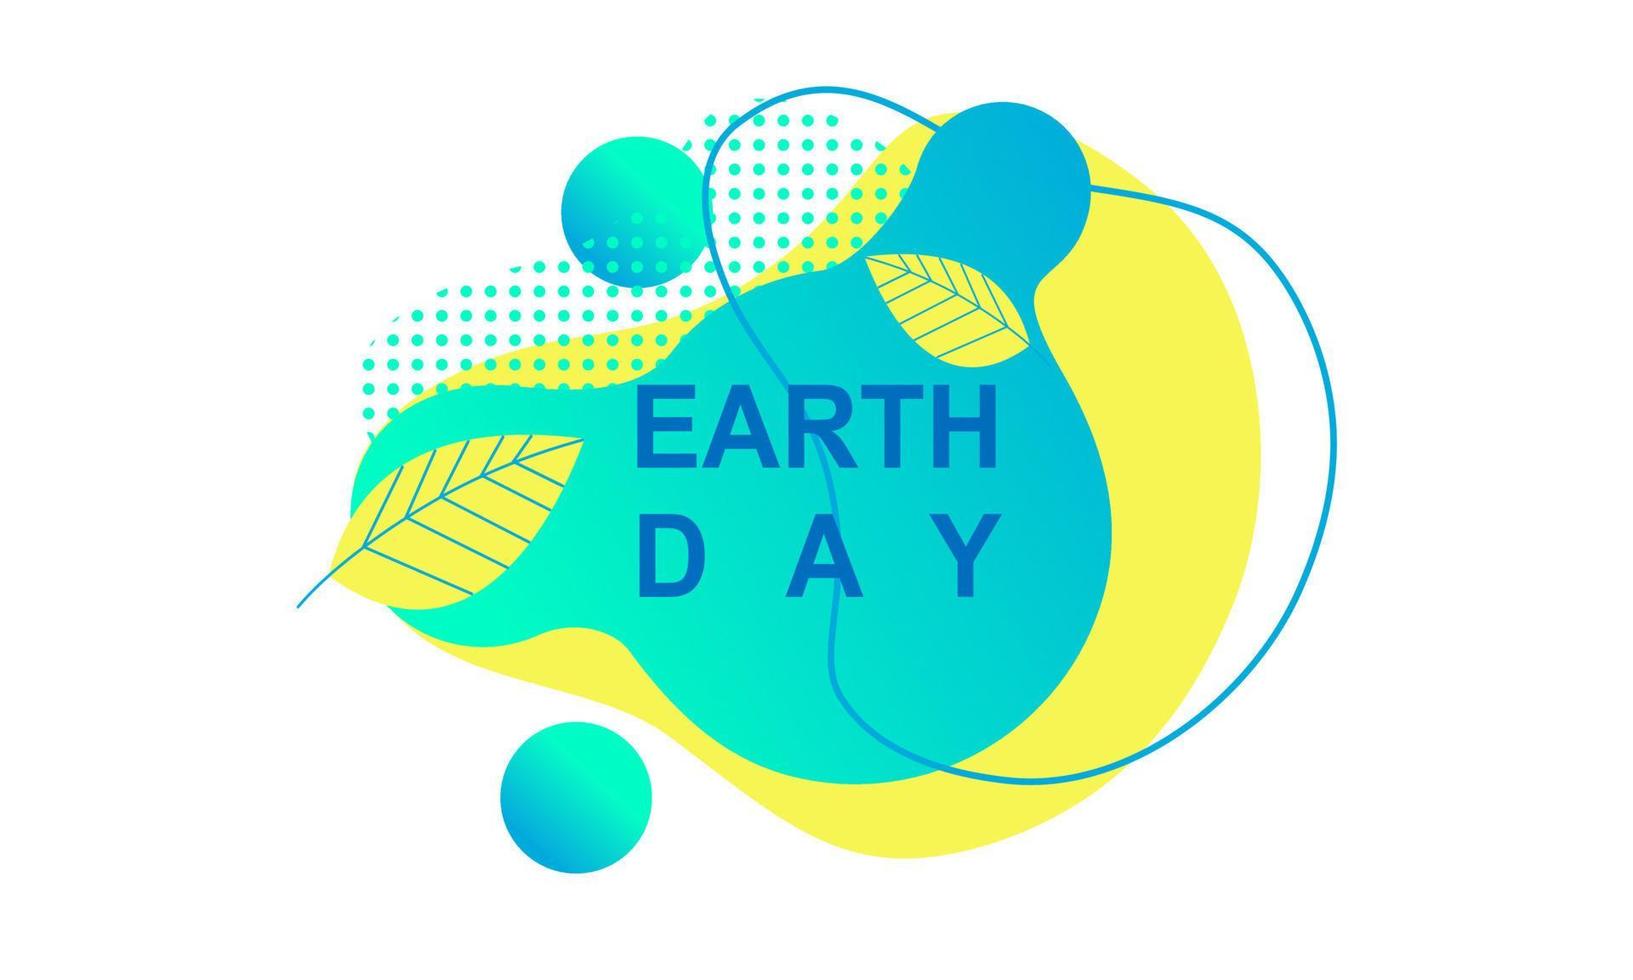 Earth Day posters with green backgrounds vector